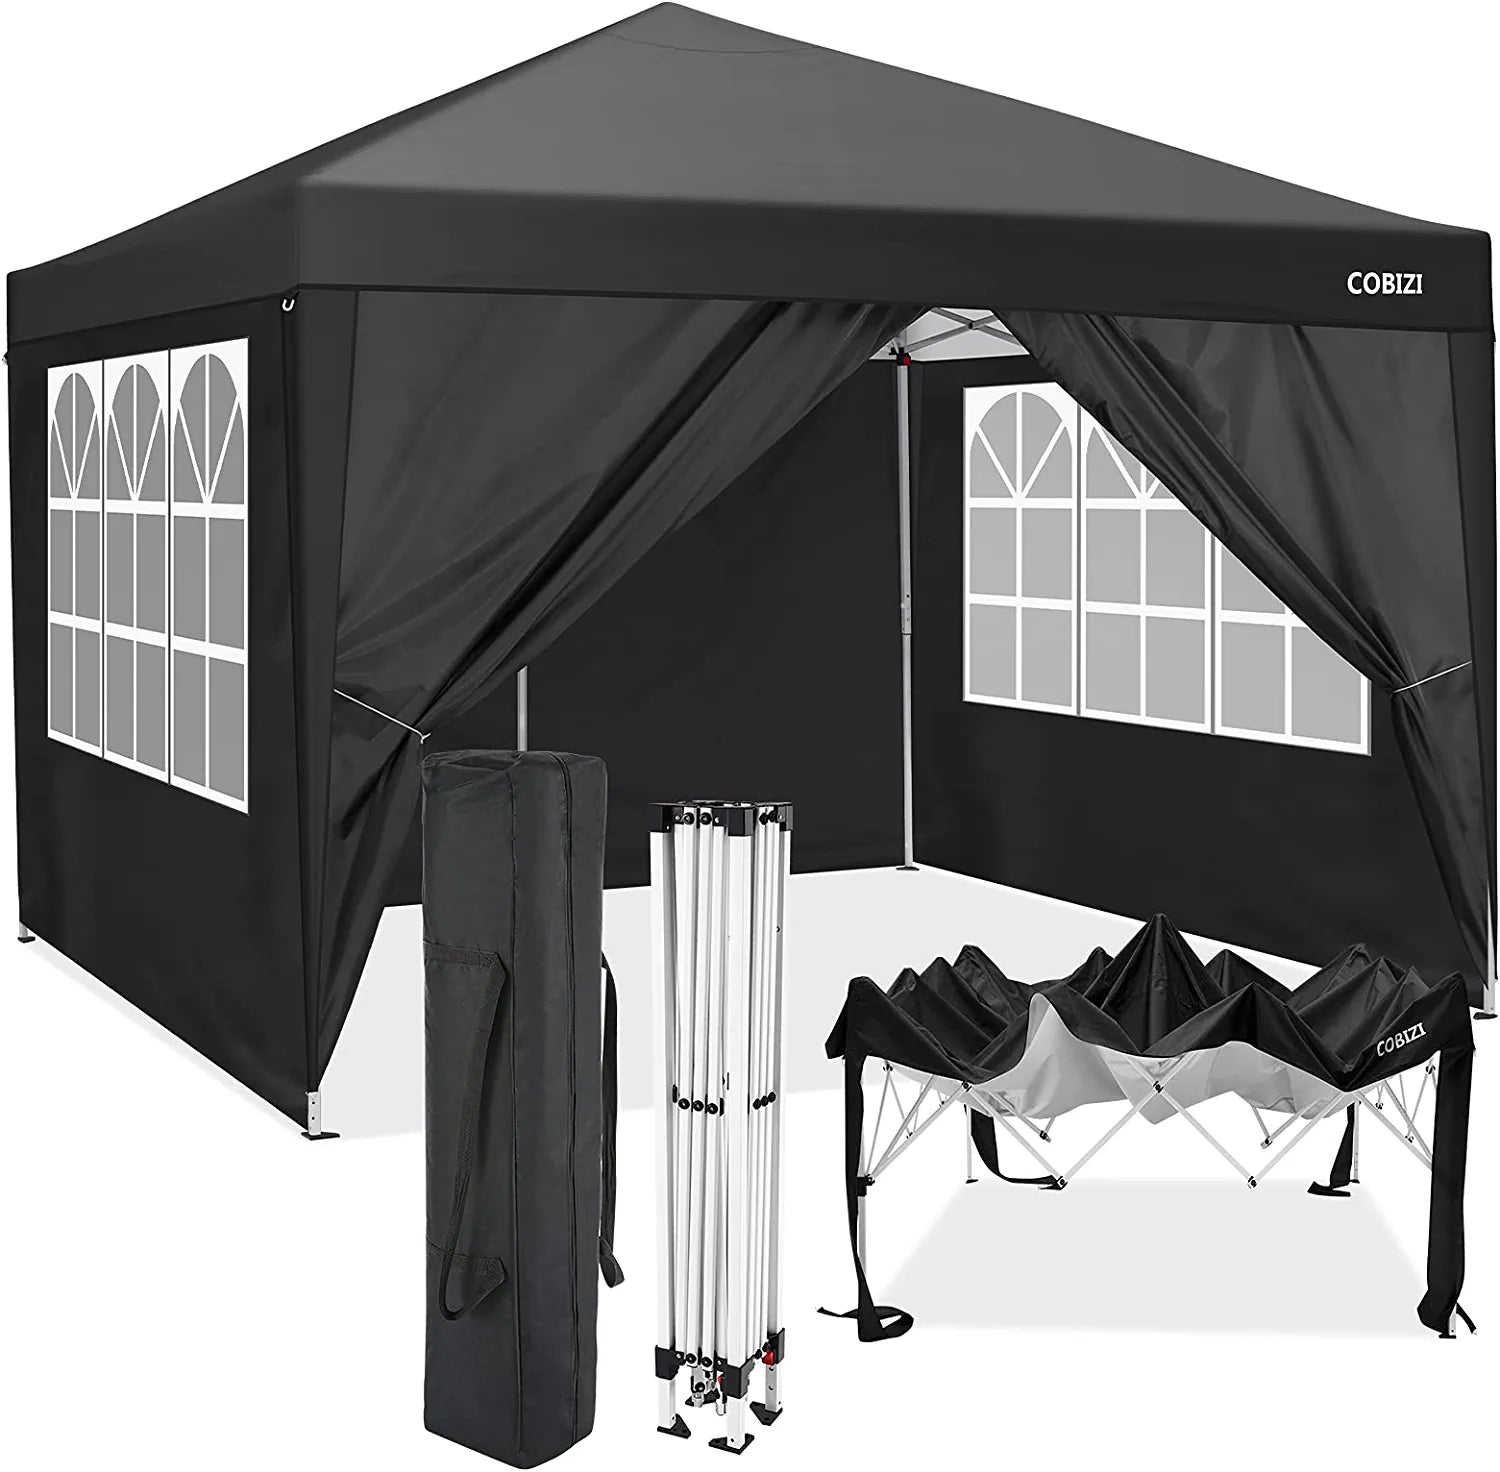 Canopy 10x10 Waterproof Pop up Canopy Tent with 4 Sidewalls, Instant Outdoor Event Shelter Tent for Parties Sun Shade Party Commercial Canopy, Carry Bag(10x10FT with 4 Sides, Black)